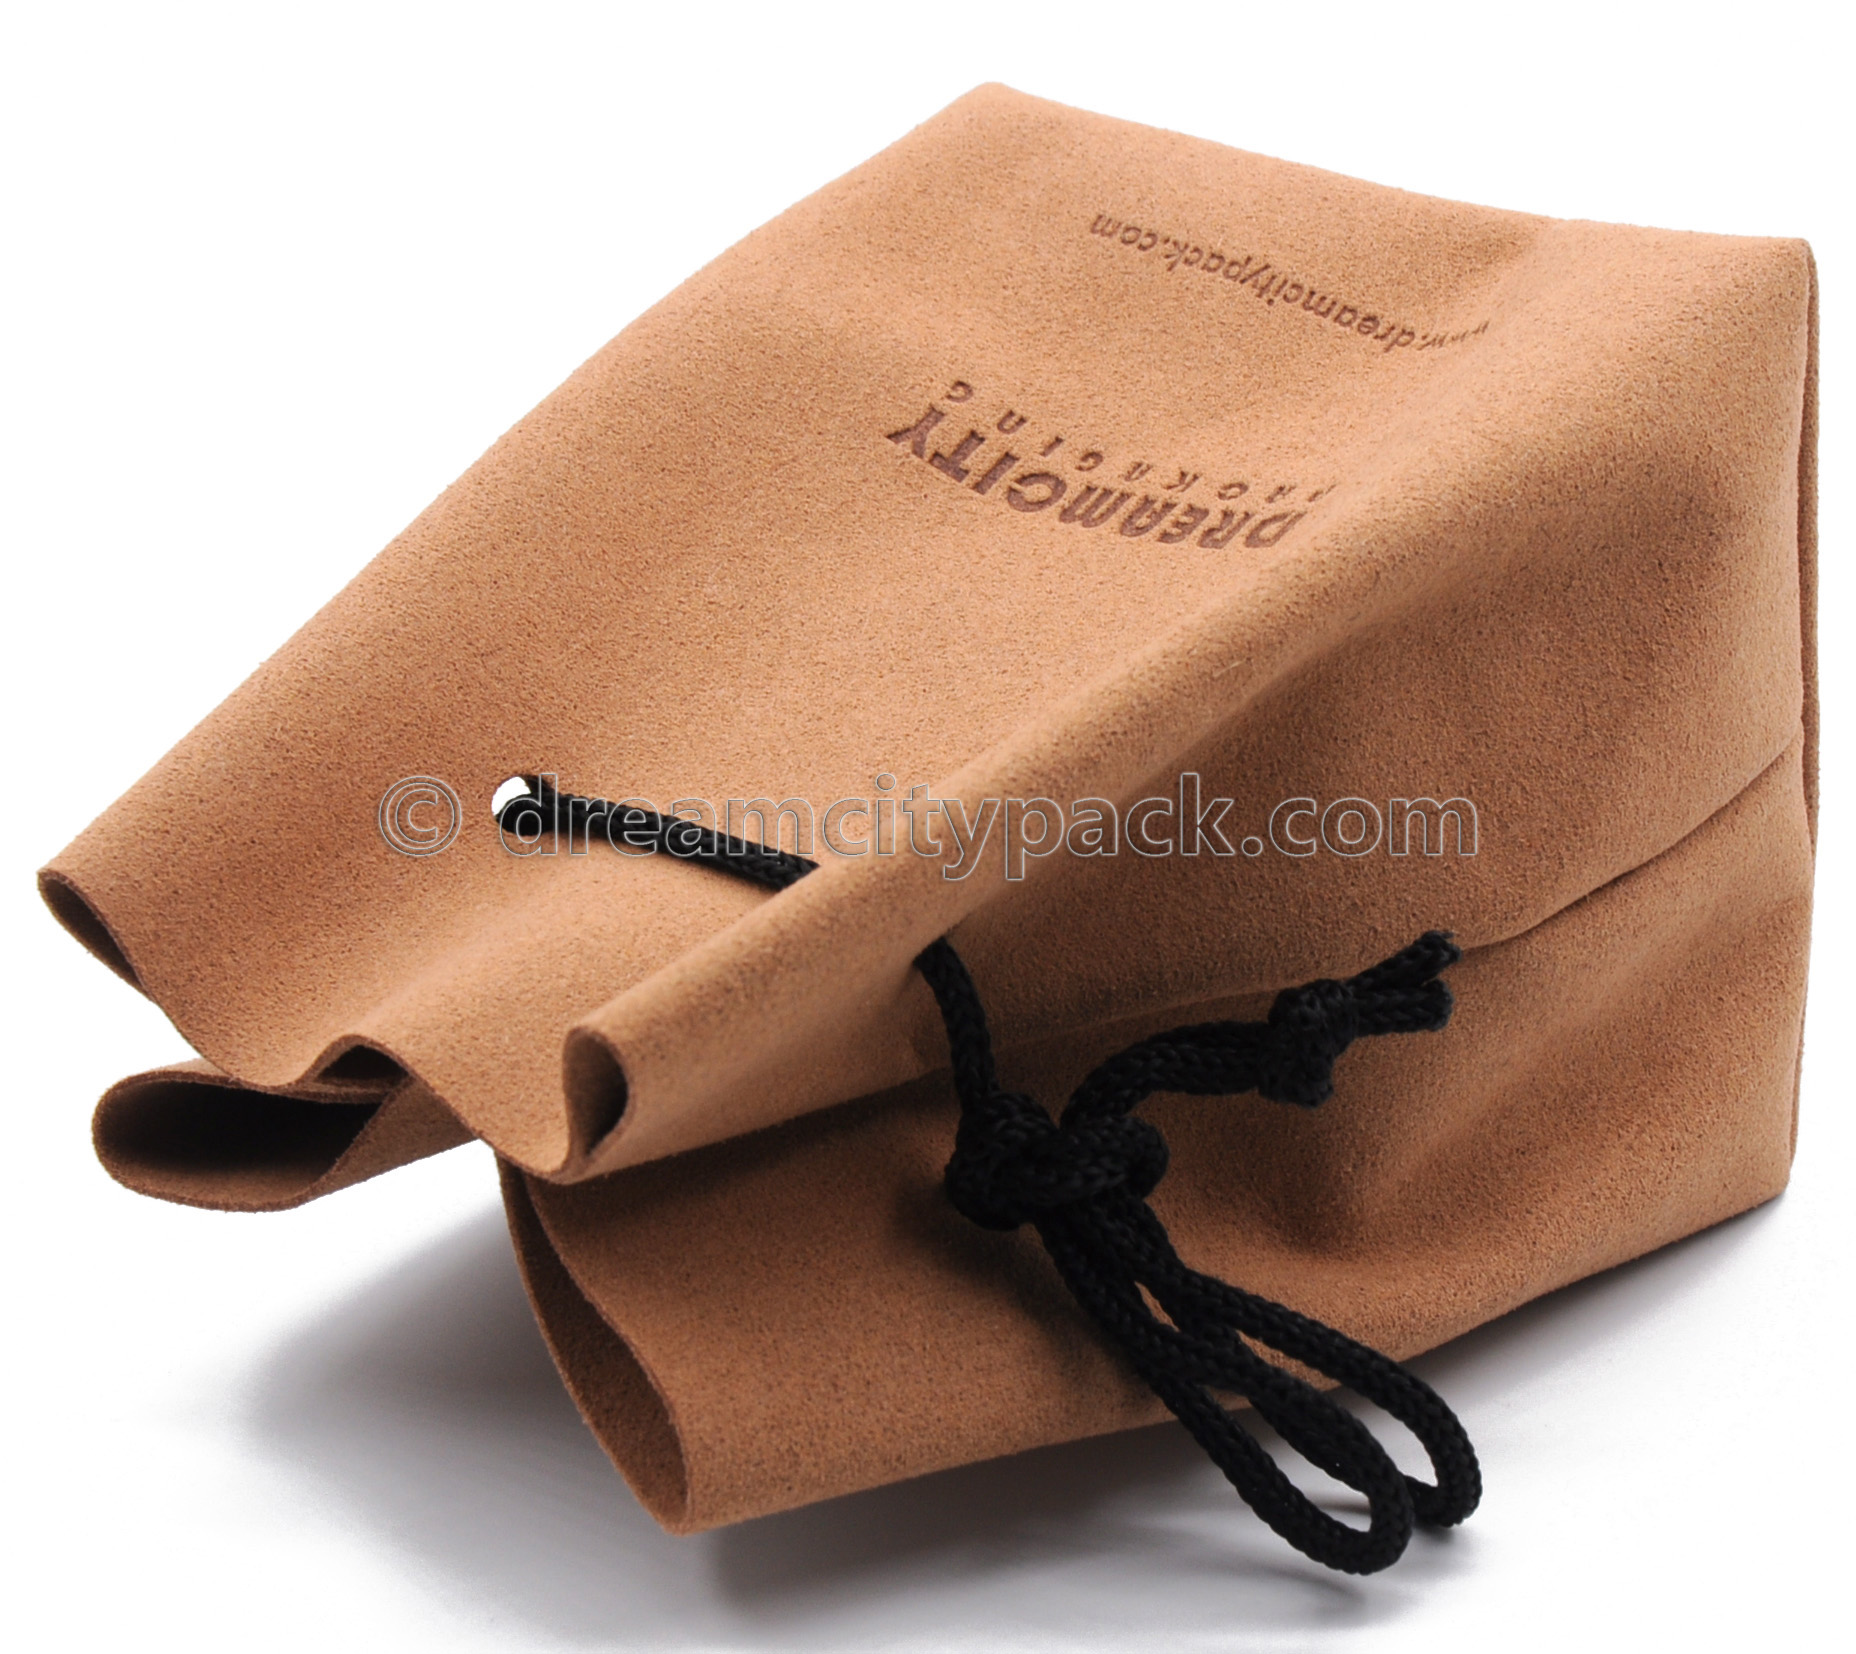 Custom Debossed Suede Leather Drawstring Bags with Square Bottom